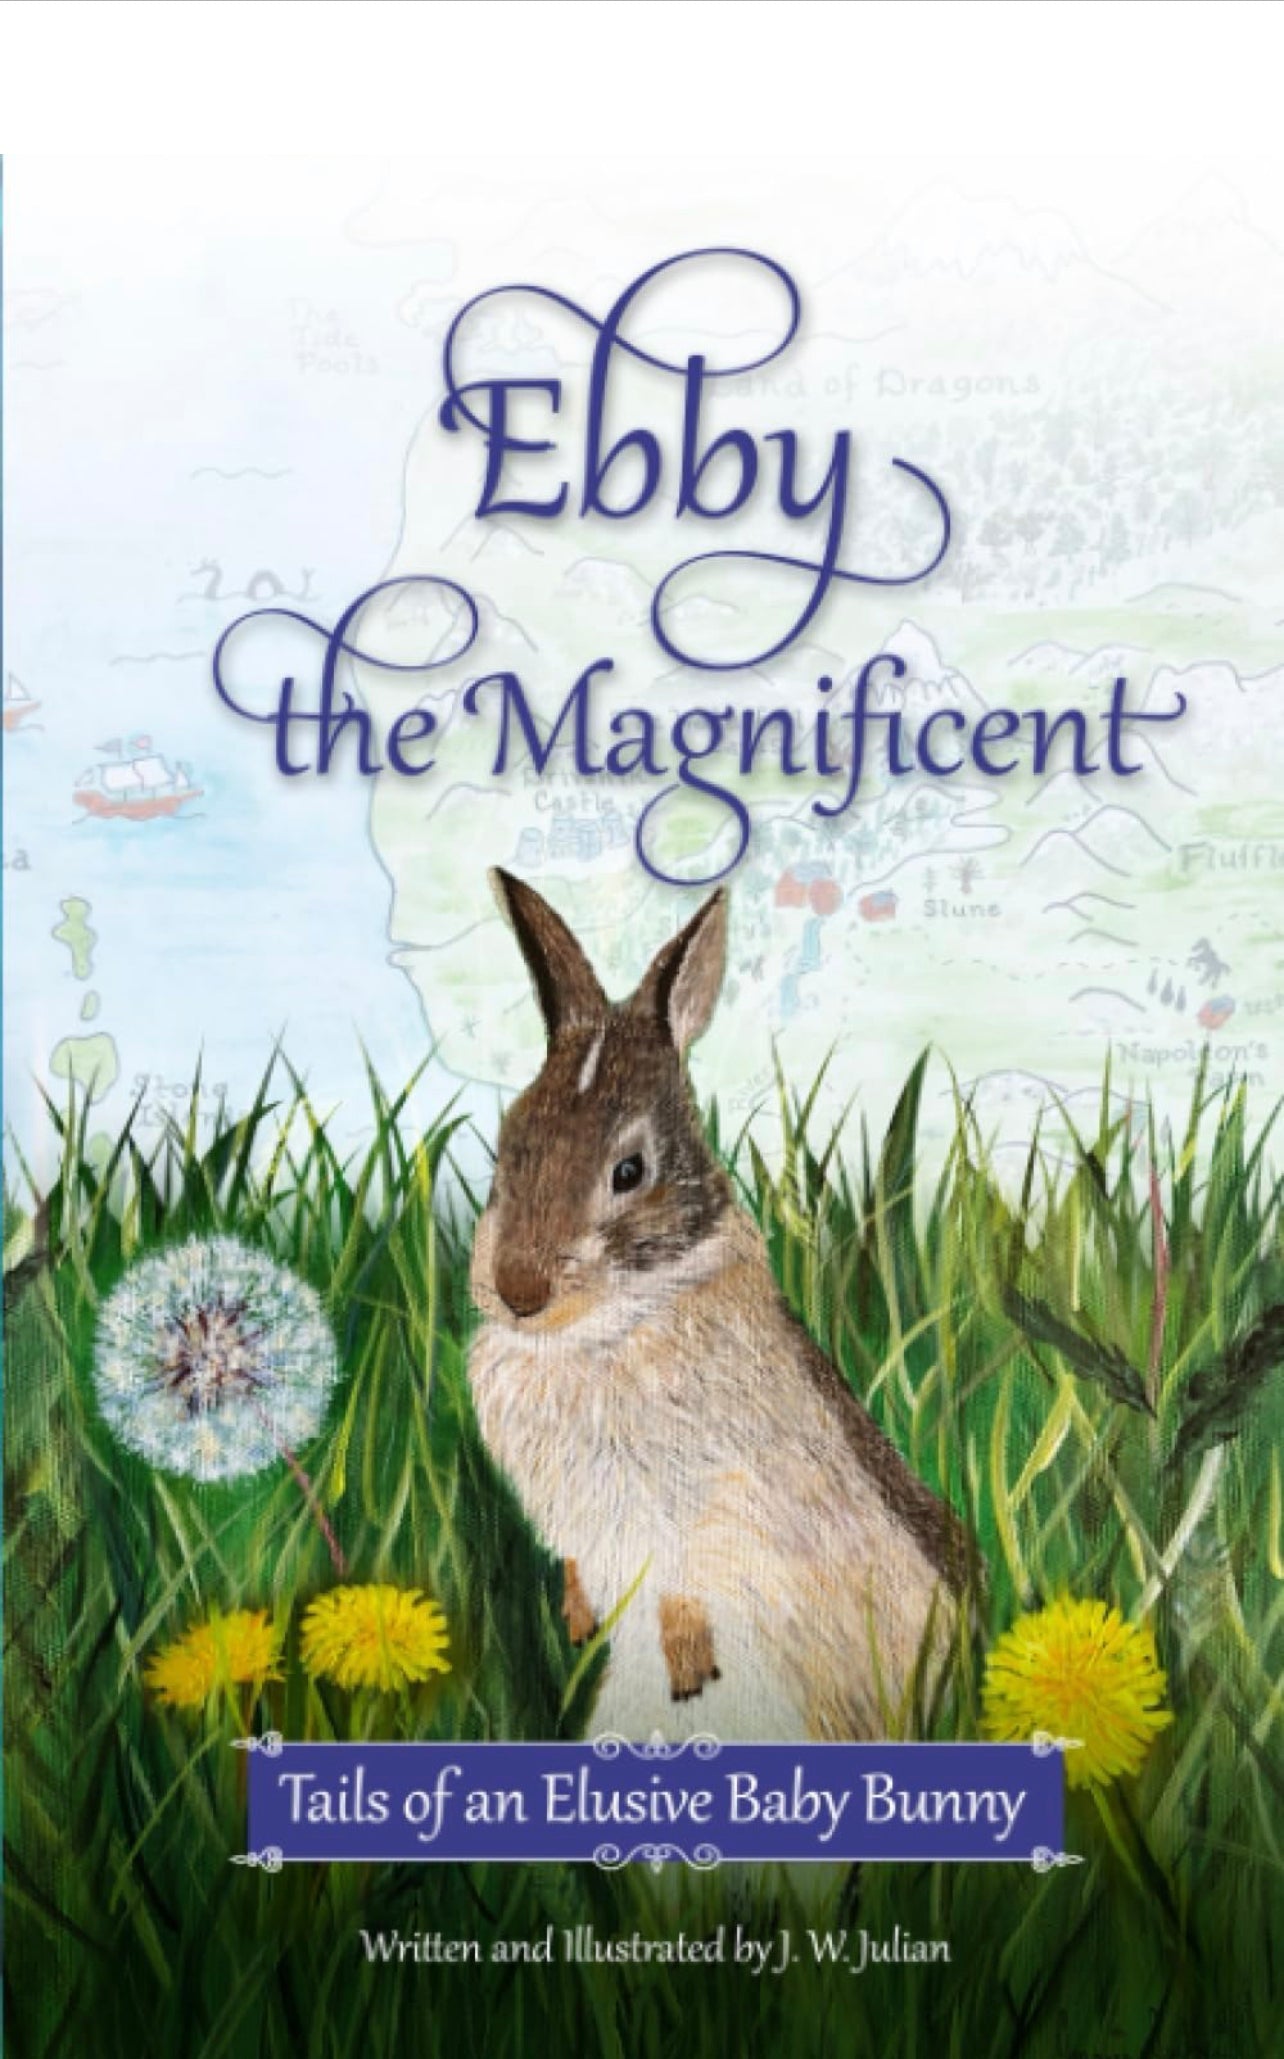 Ebby the Magnificent: tales of an elusive bunny